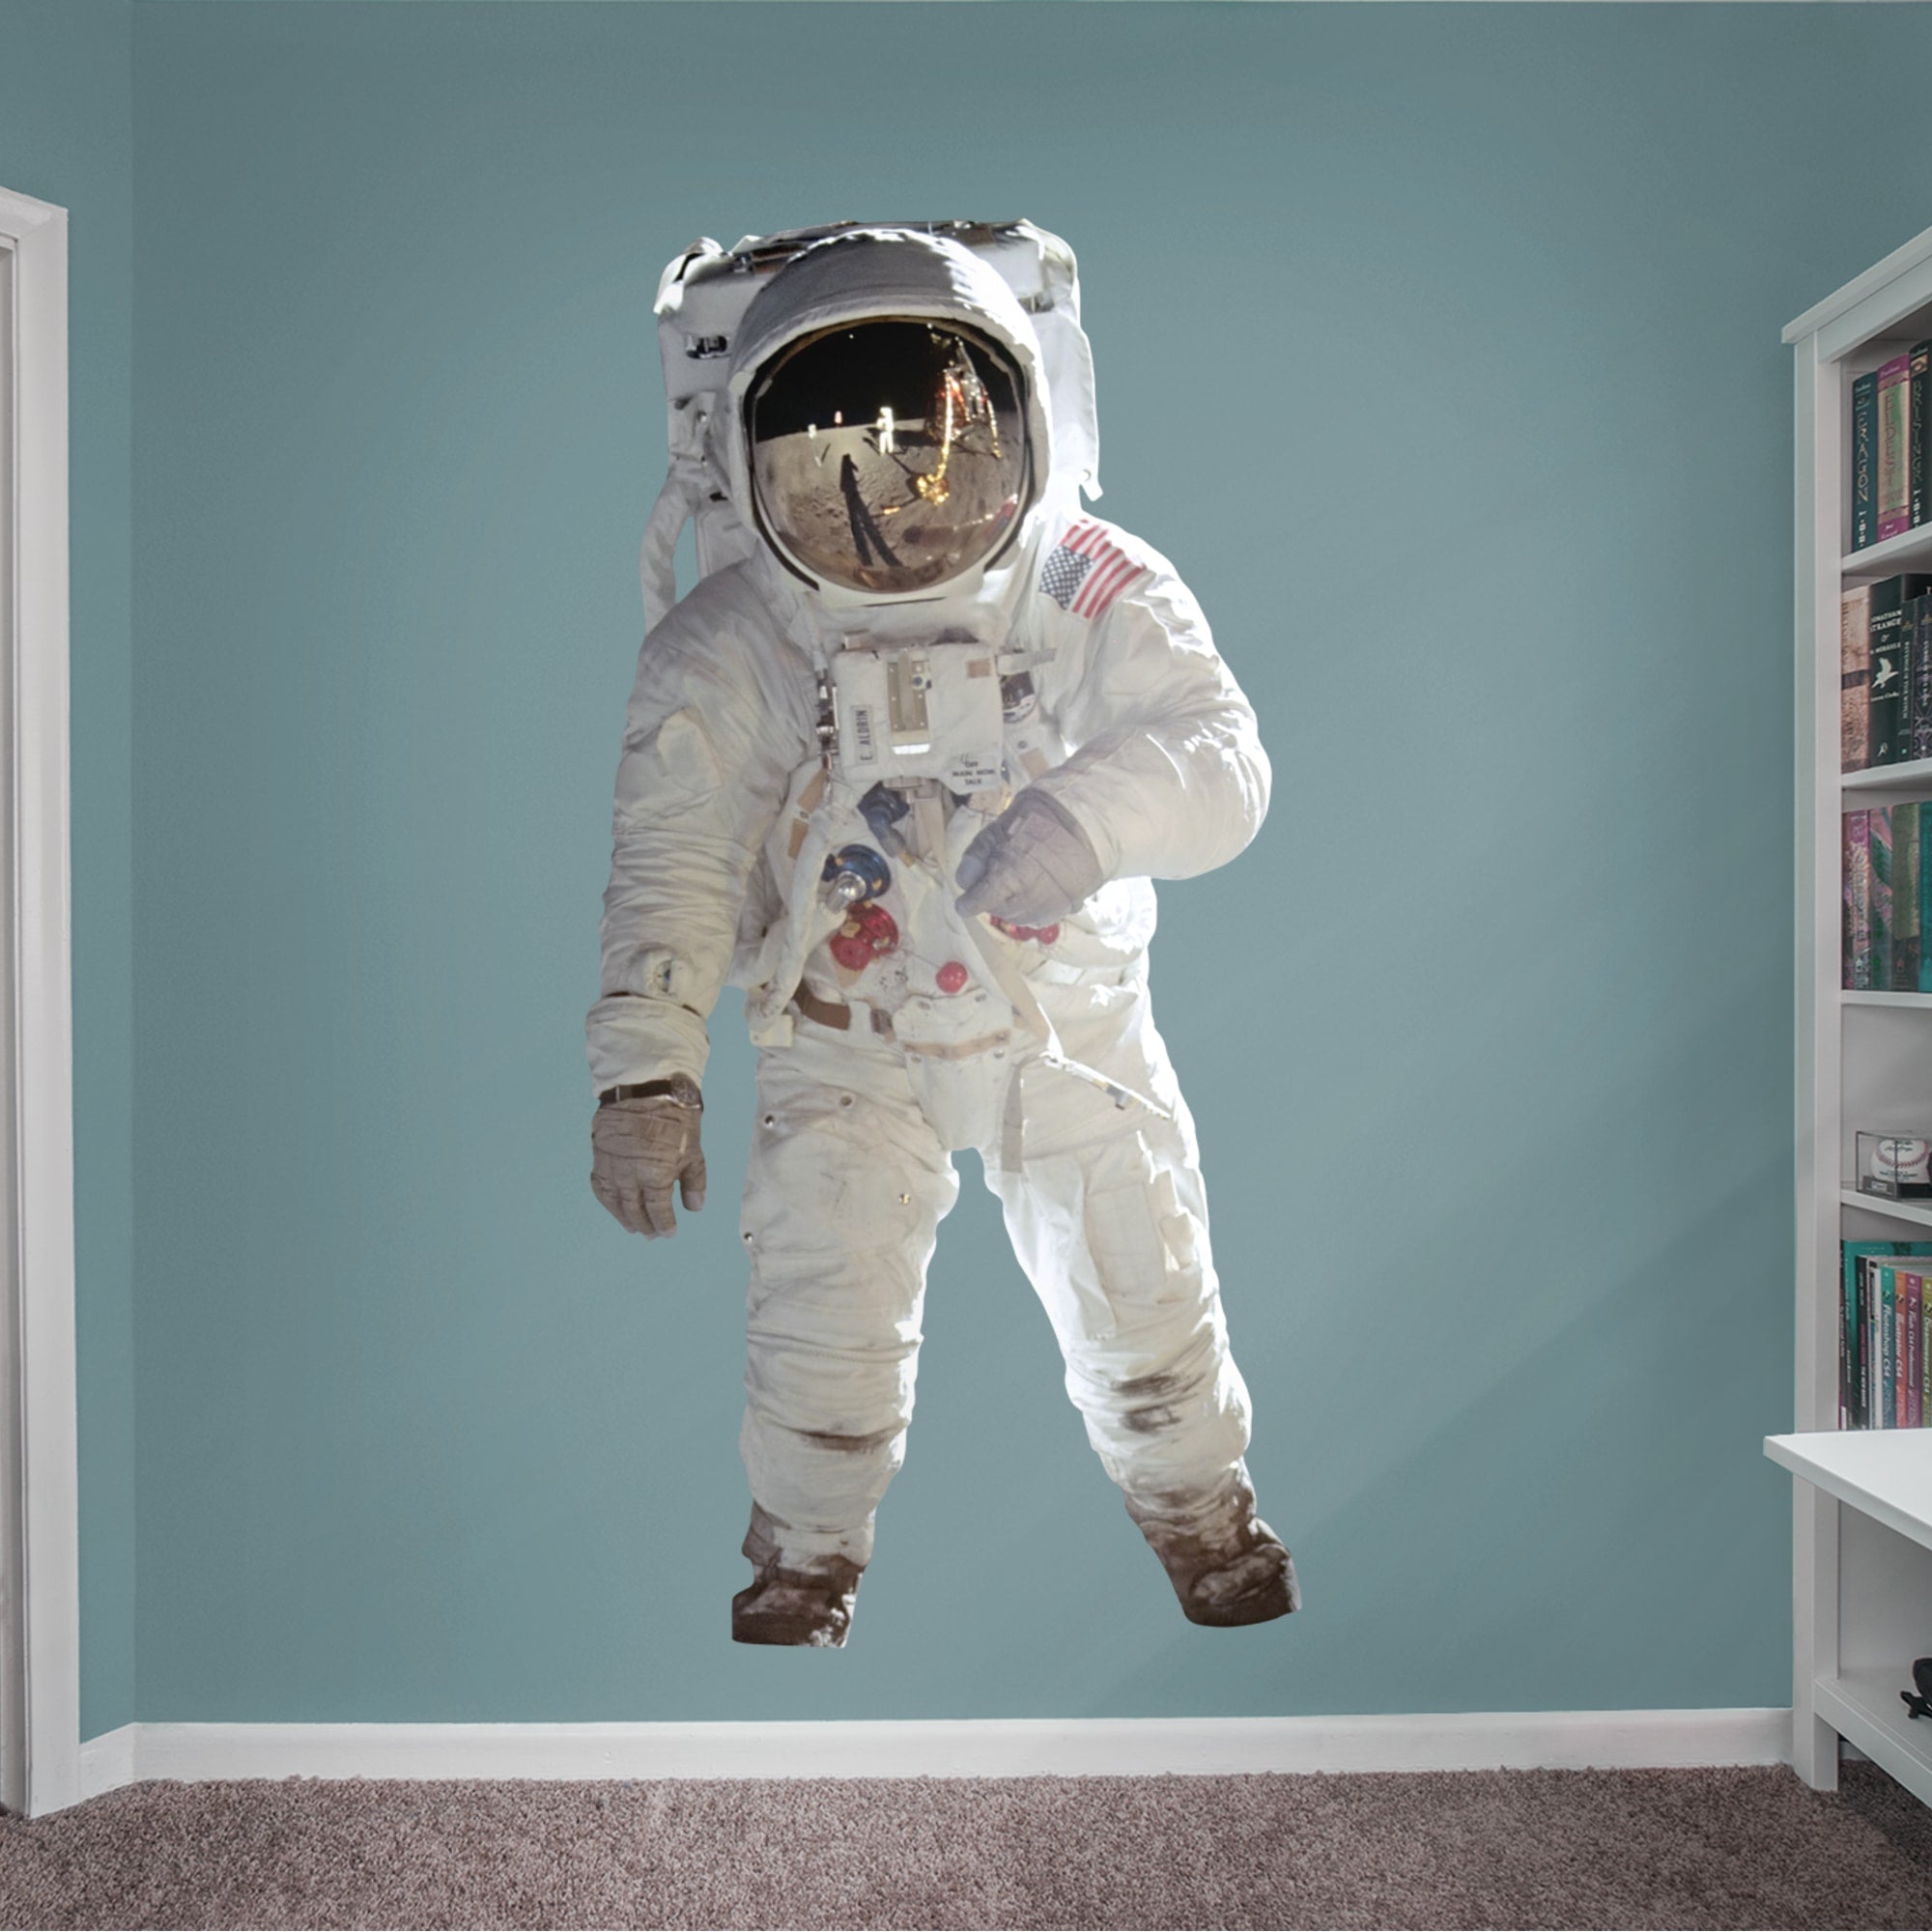 Buzz Aldrin: Astronaut - Officially Licensed Removable Wall Decal by Fathead | Vinyl